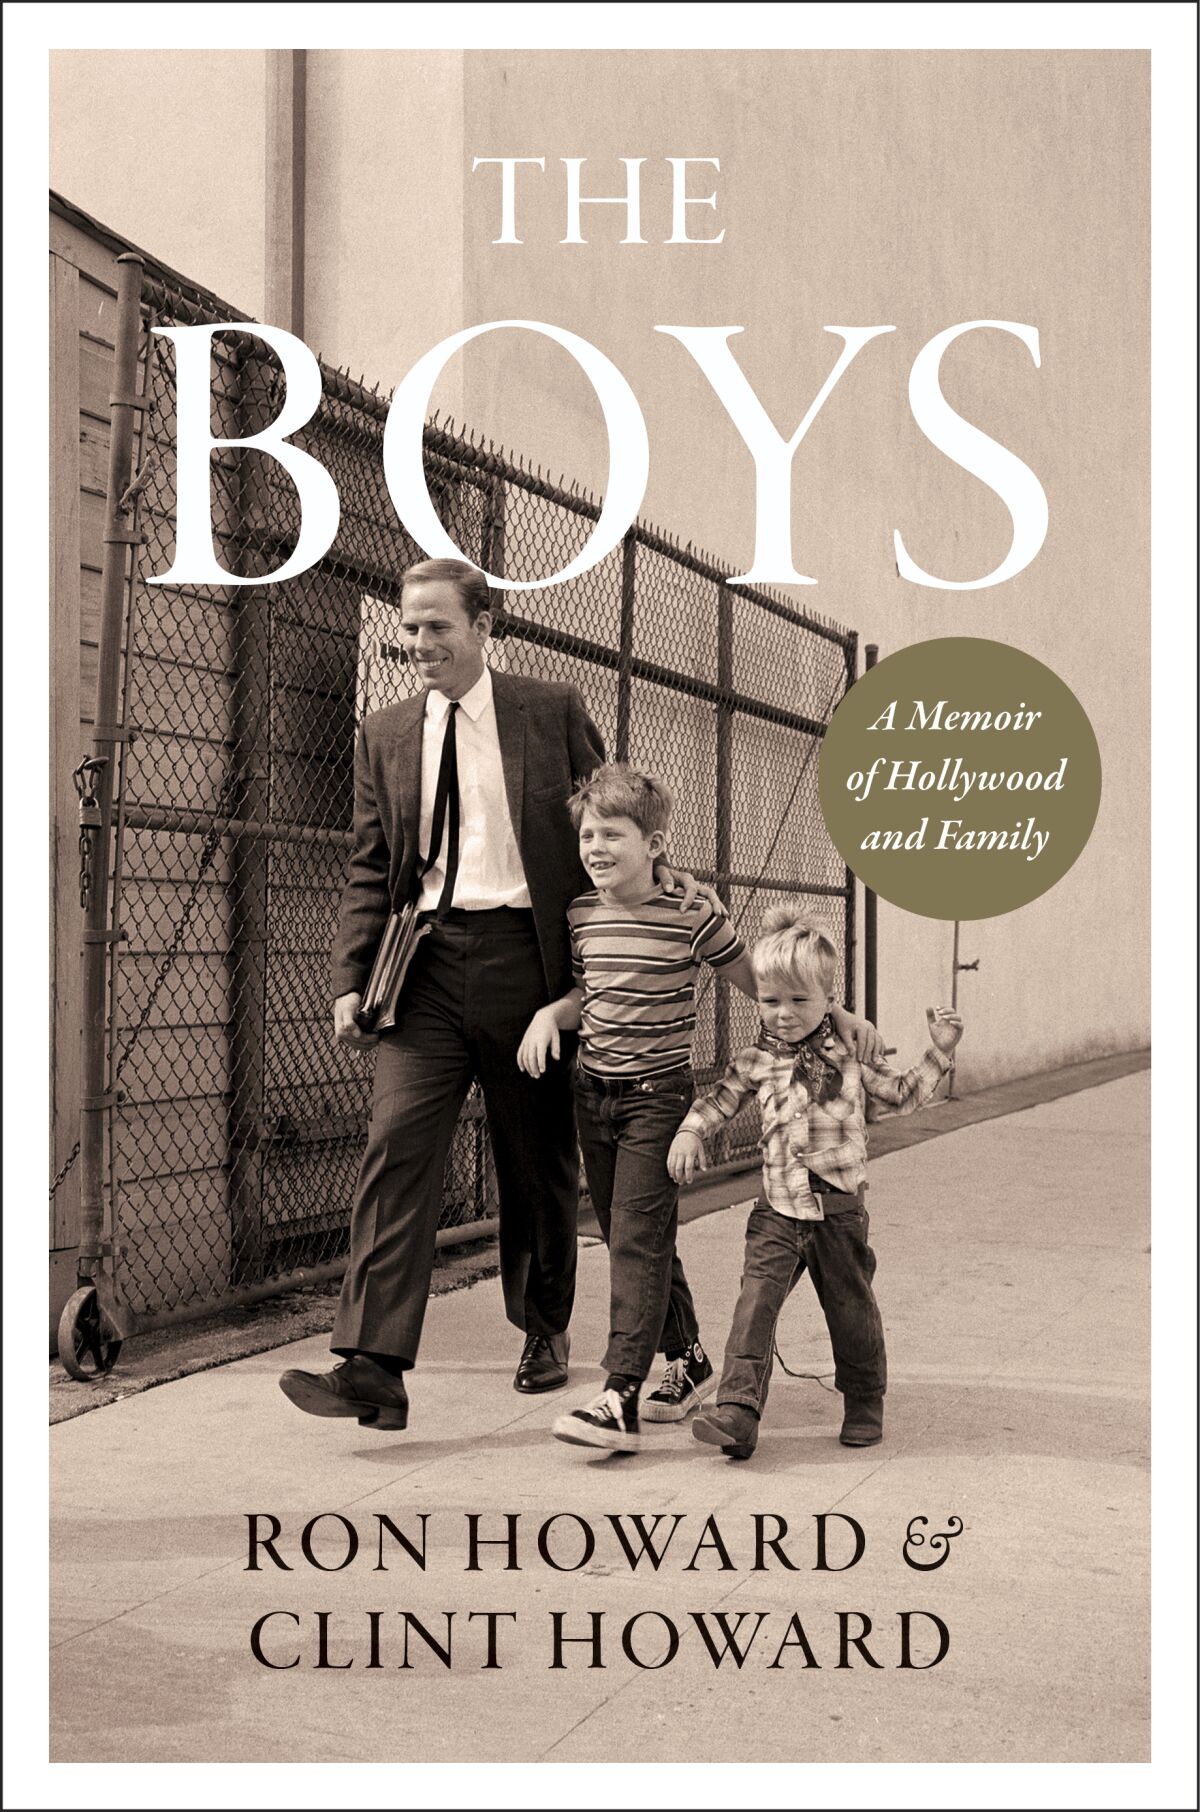 This cover image released by William Morrow shows "The Boys: A Memoir of Hollywood and Family" by Ron Howard and Clint Howard. (William Morrow via AP)